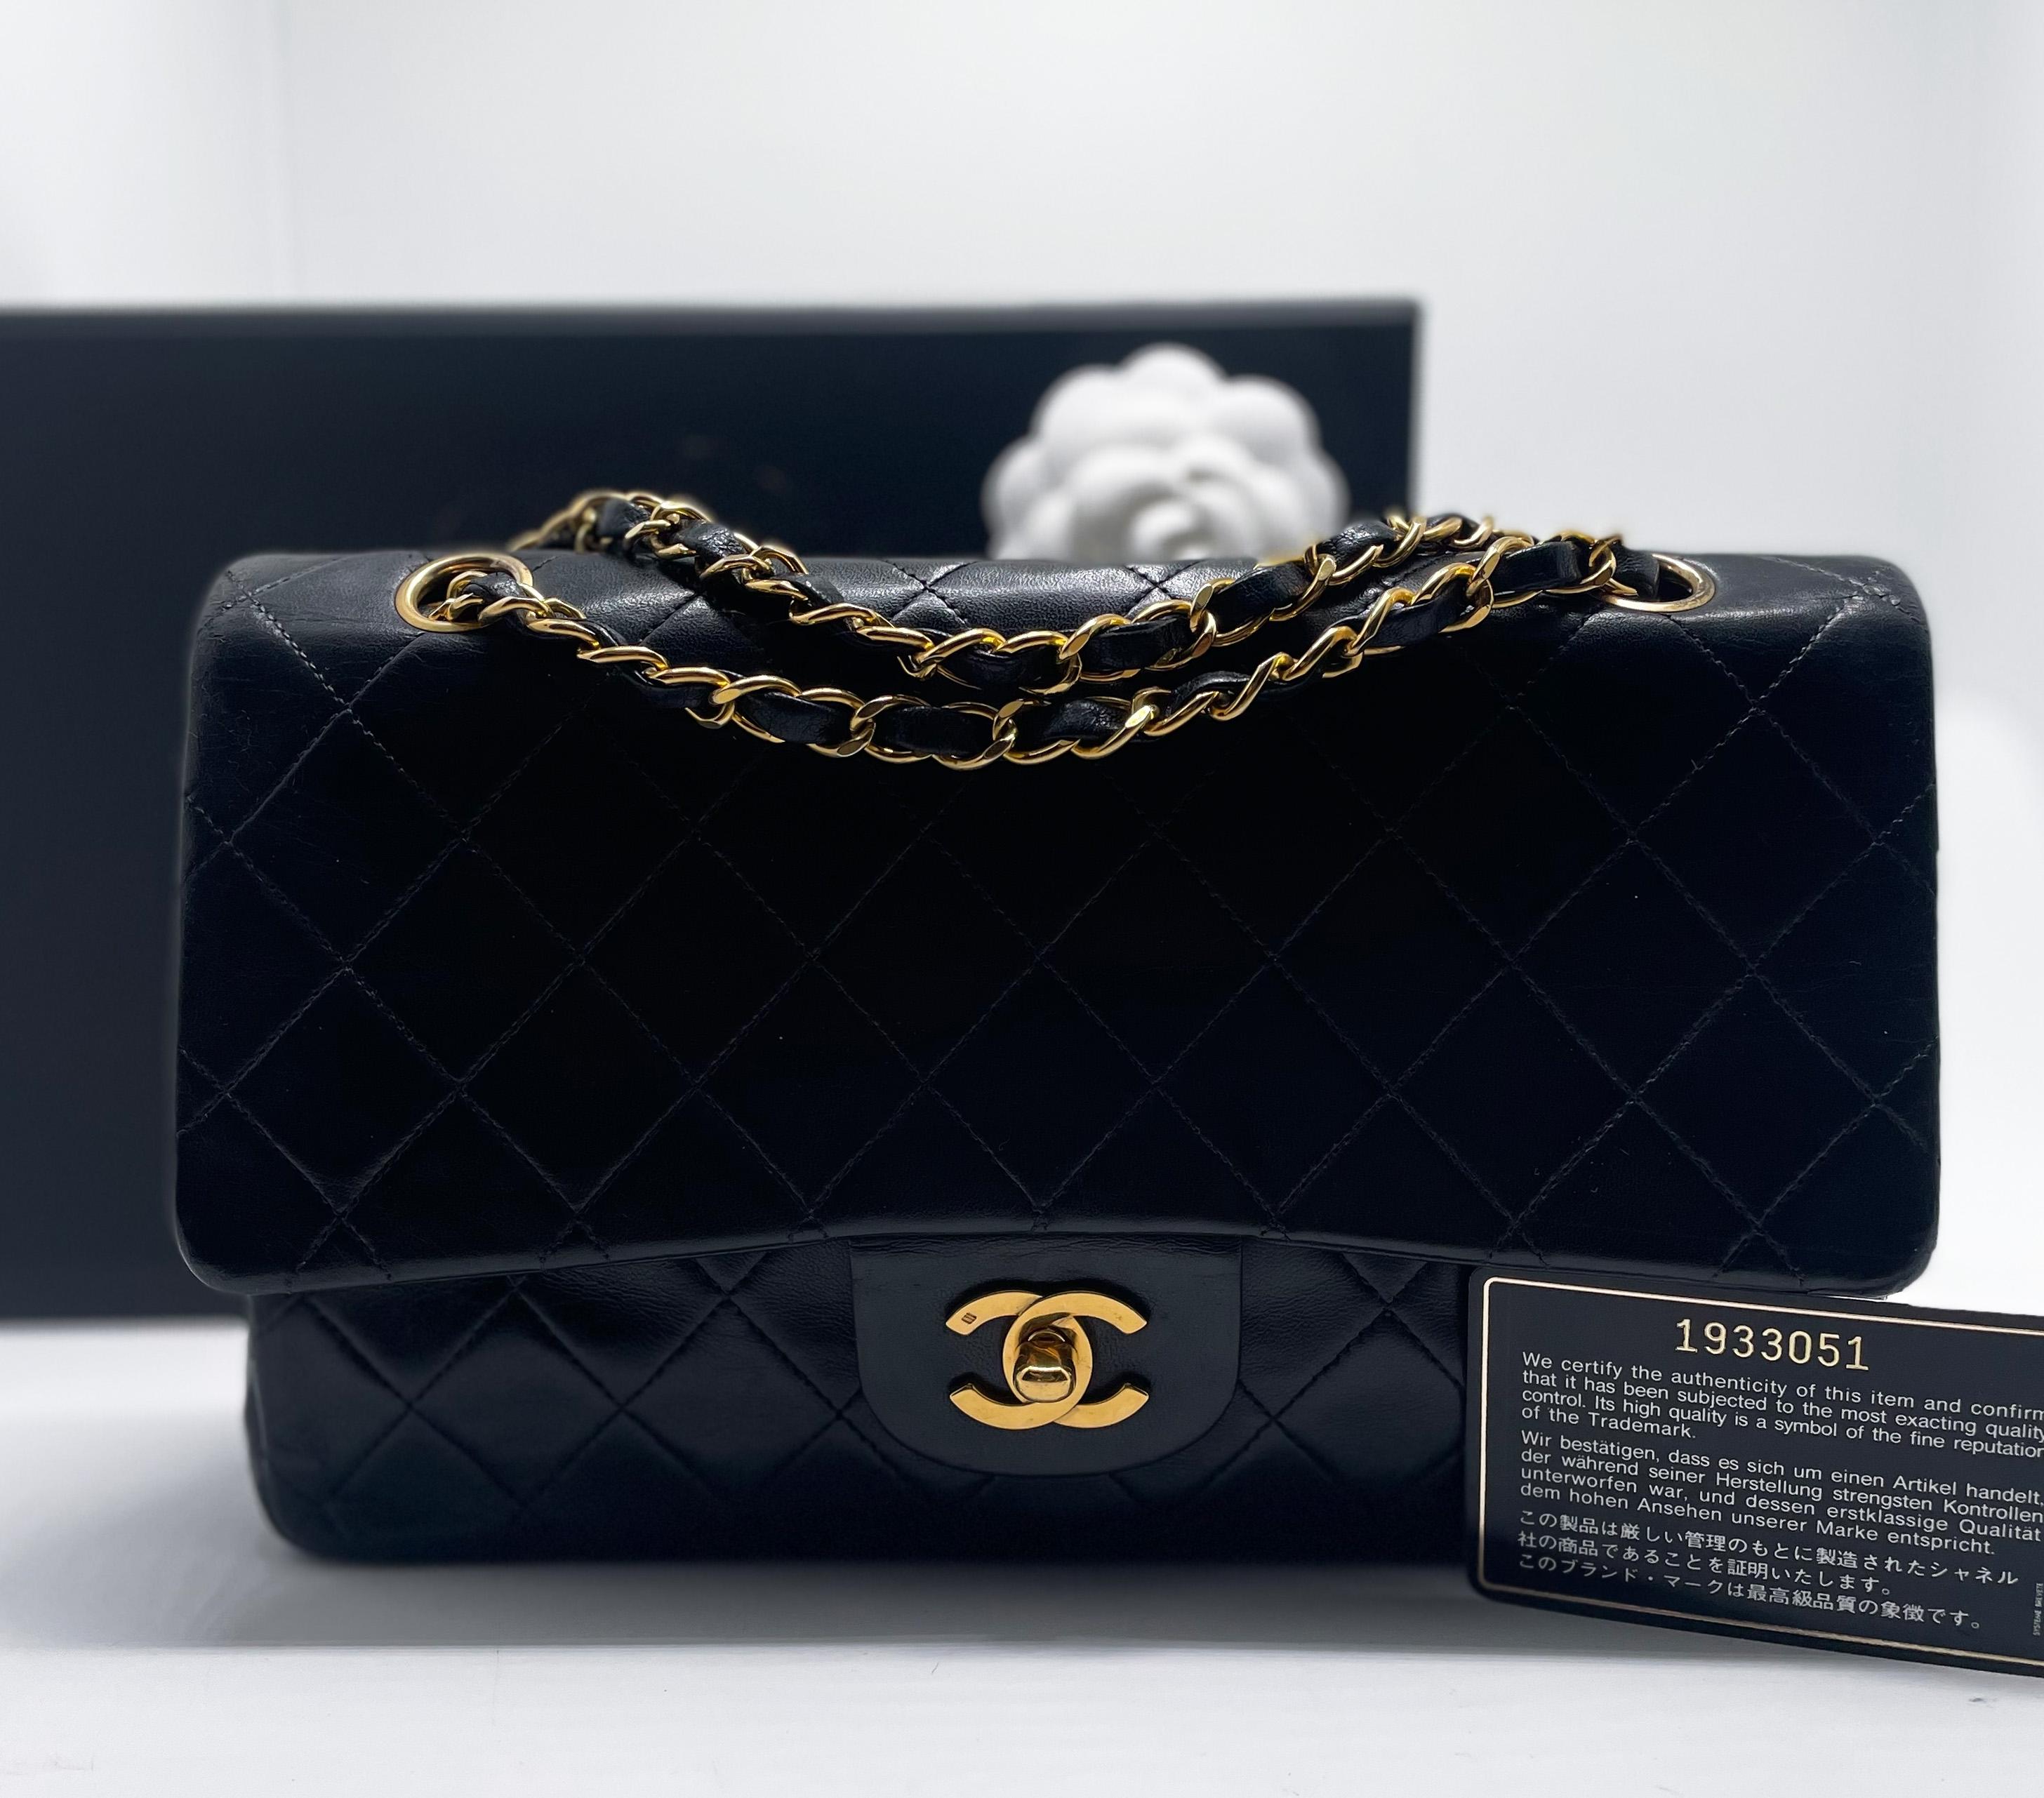 timeless Chanel Classique handbag in black lambskin and 24-carat plated gold metal. This must have with the Timeless double flap in black quilted leather, a gold metal chain strap interwoven with black leather allowing it to be worn in the hand or